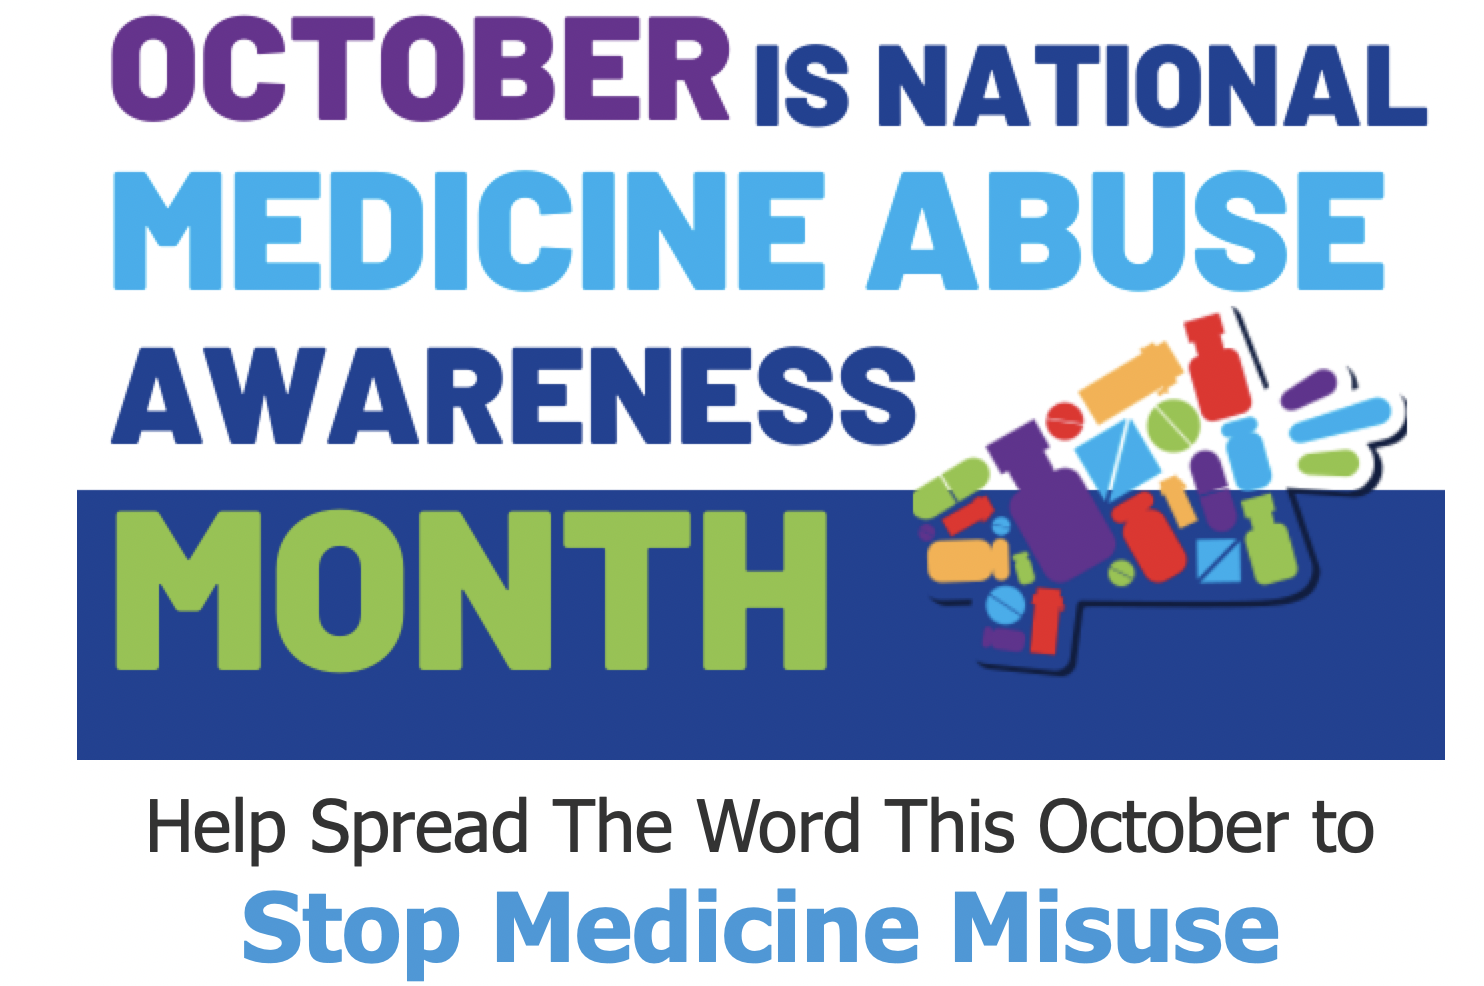 October is National Medicine Abuse Awareness Month